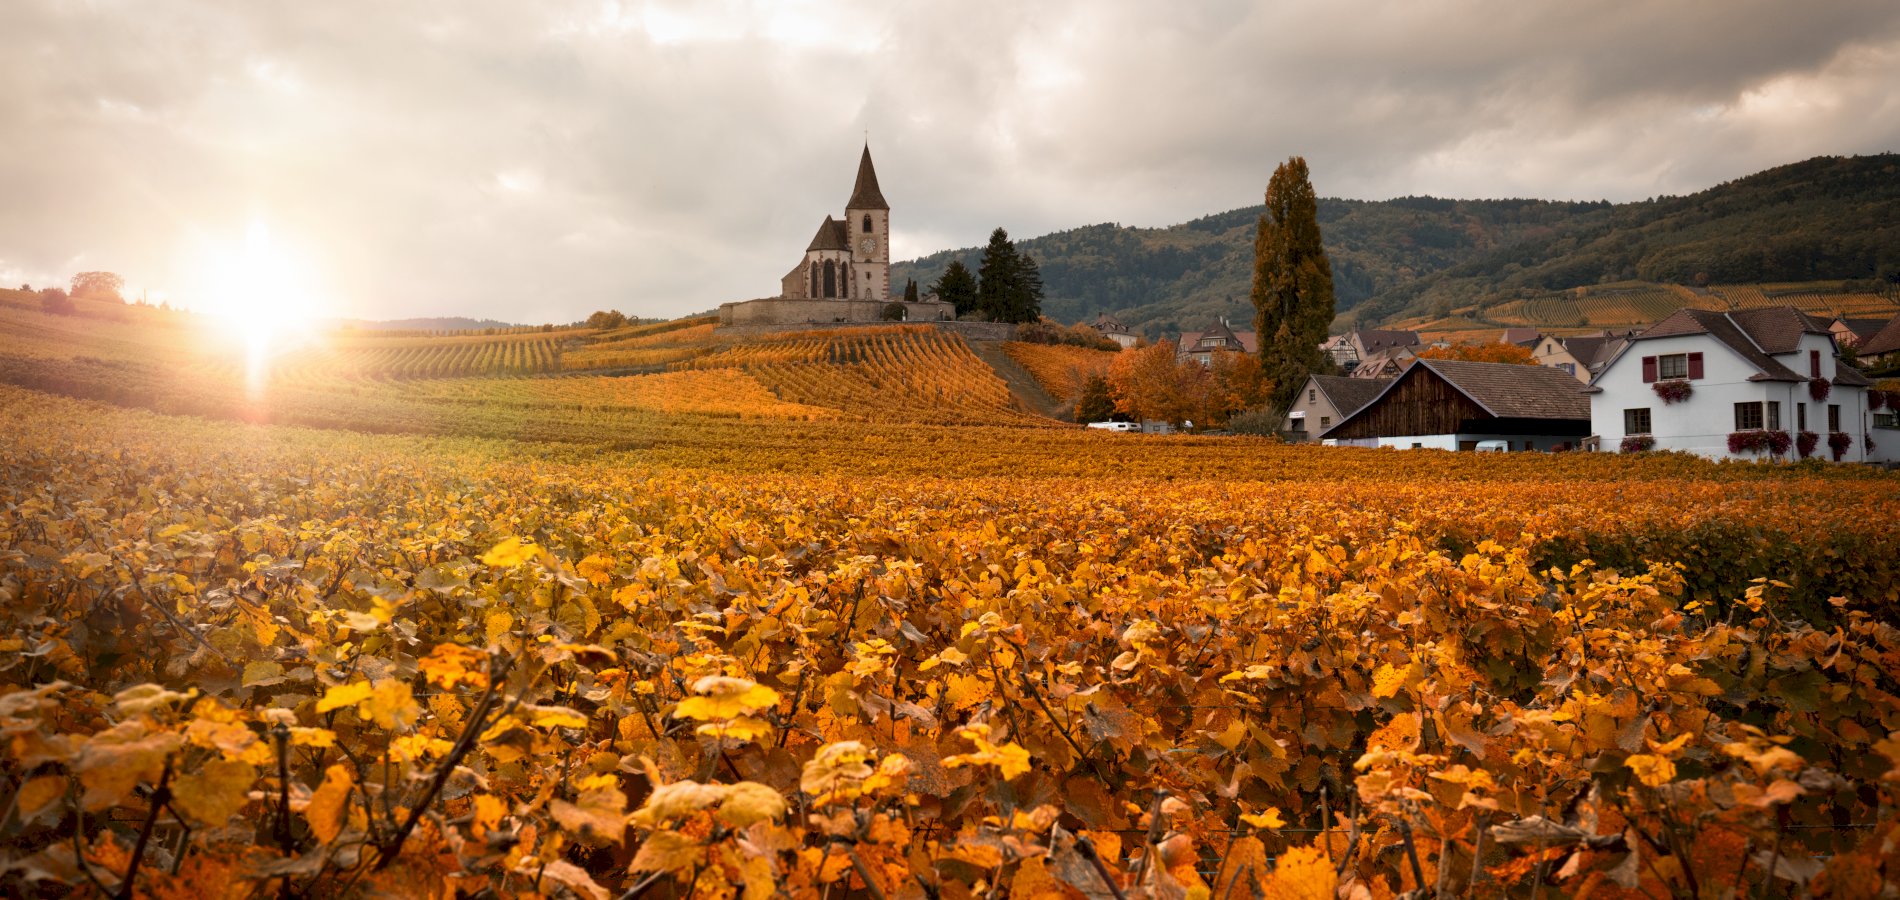 Ophorus Tours - A Half Day Trip From Strasbourg Alsace Wine Tour